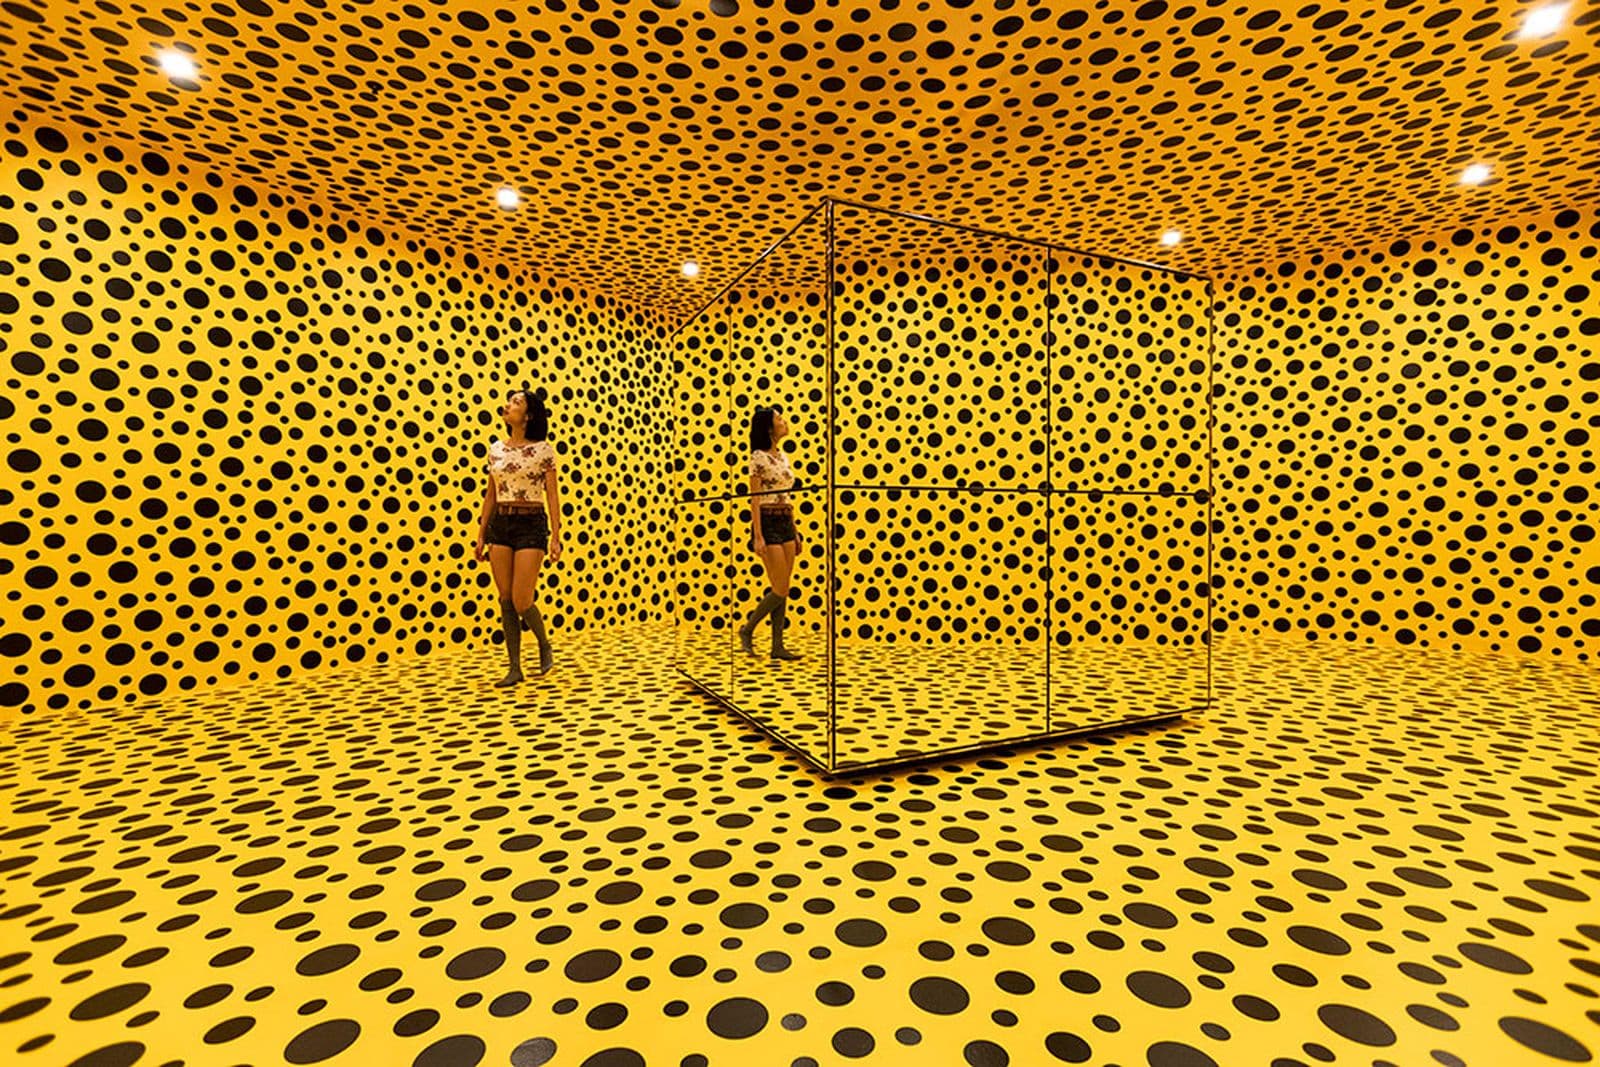 A woman walks through a mirrored yellow room covered in black dots